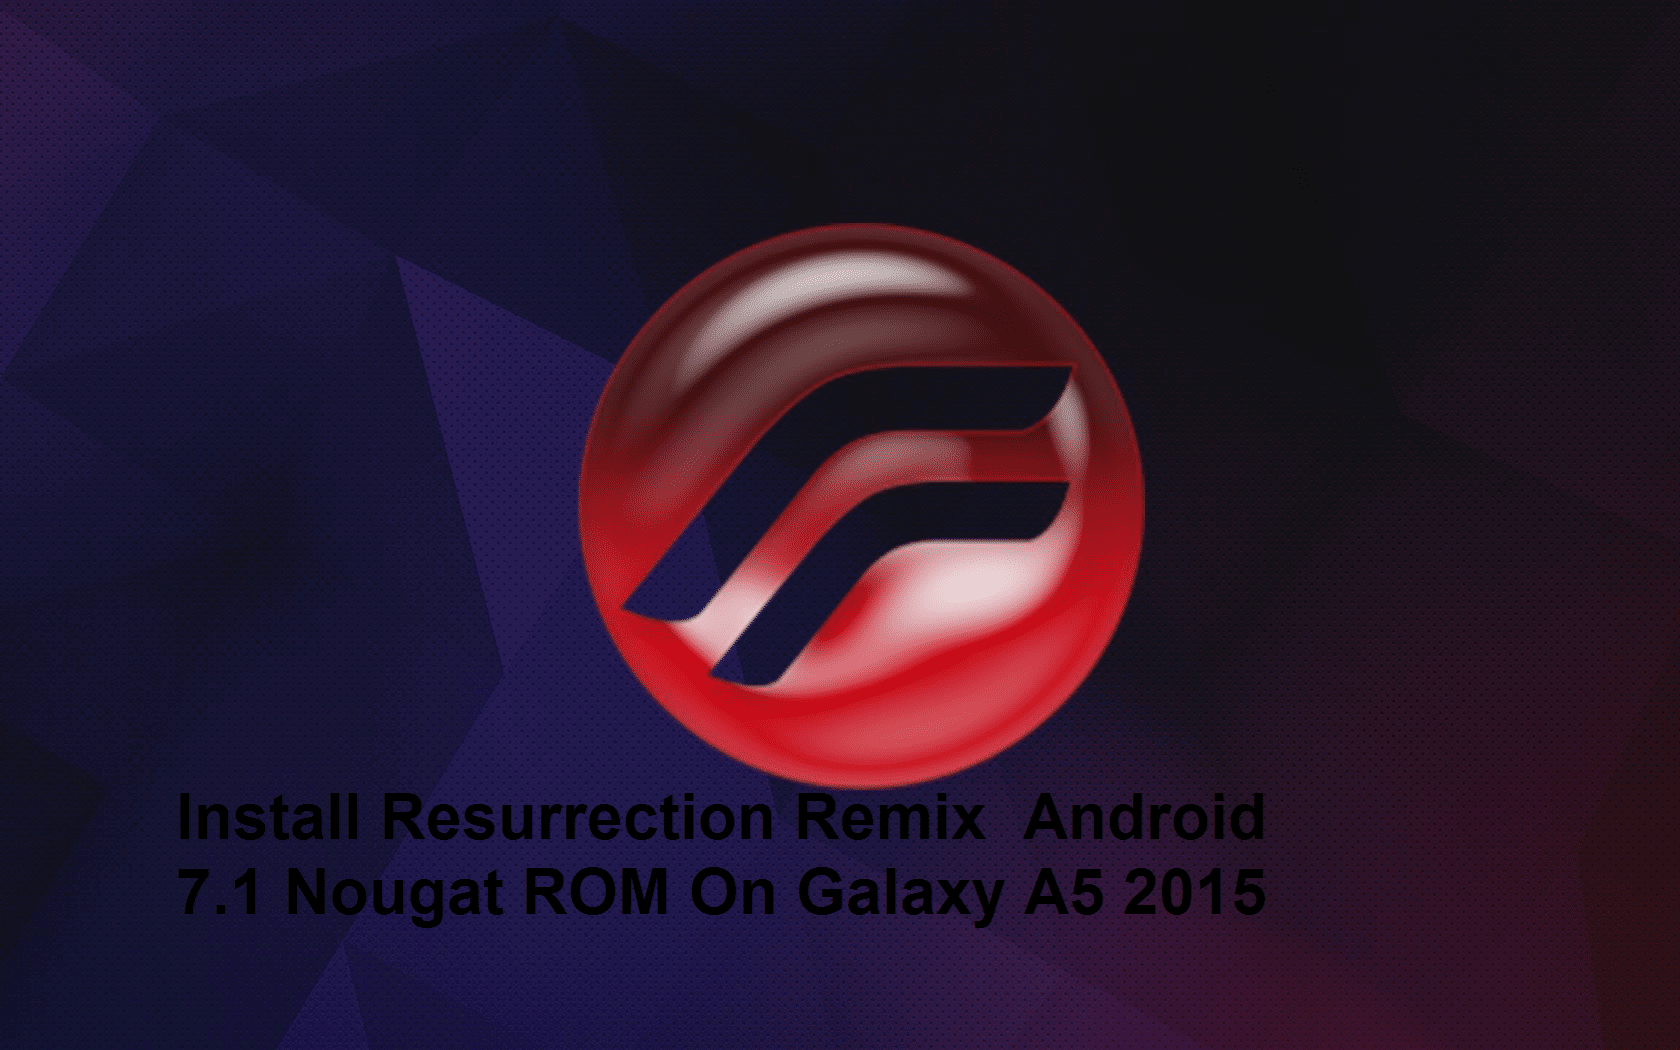 update Galaxy A5 to Android 7.1 Resurrection Remix ROM